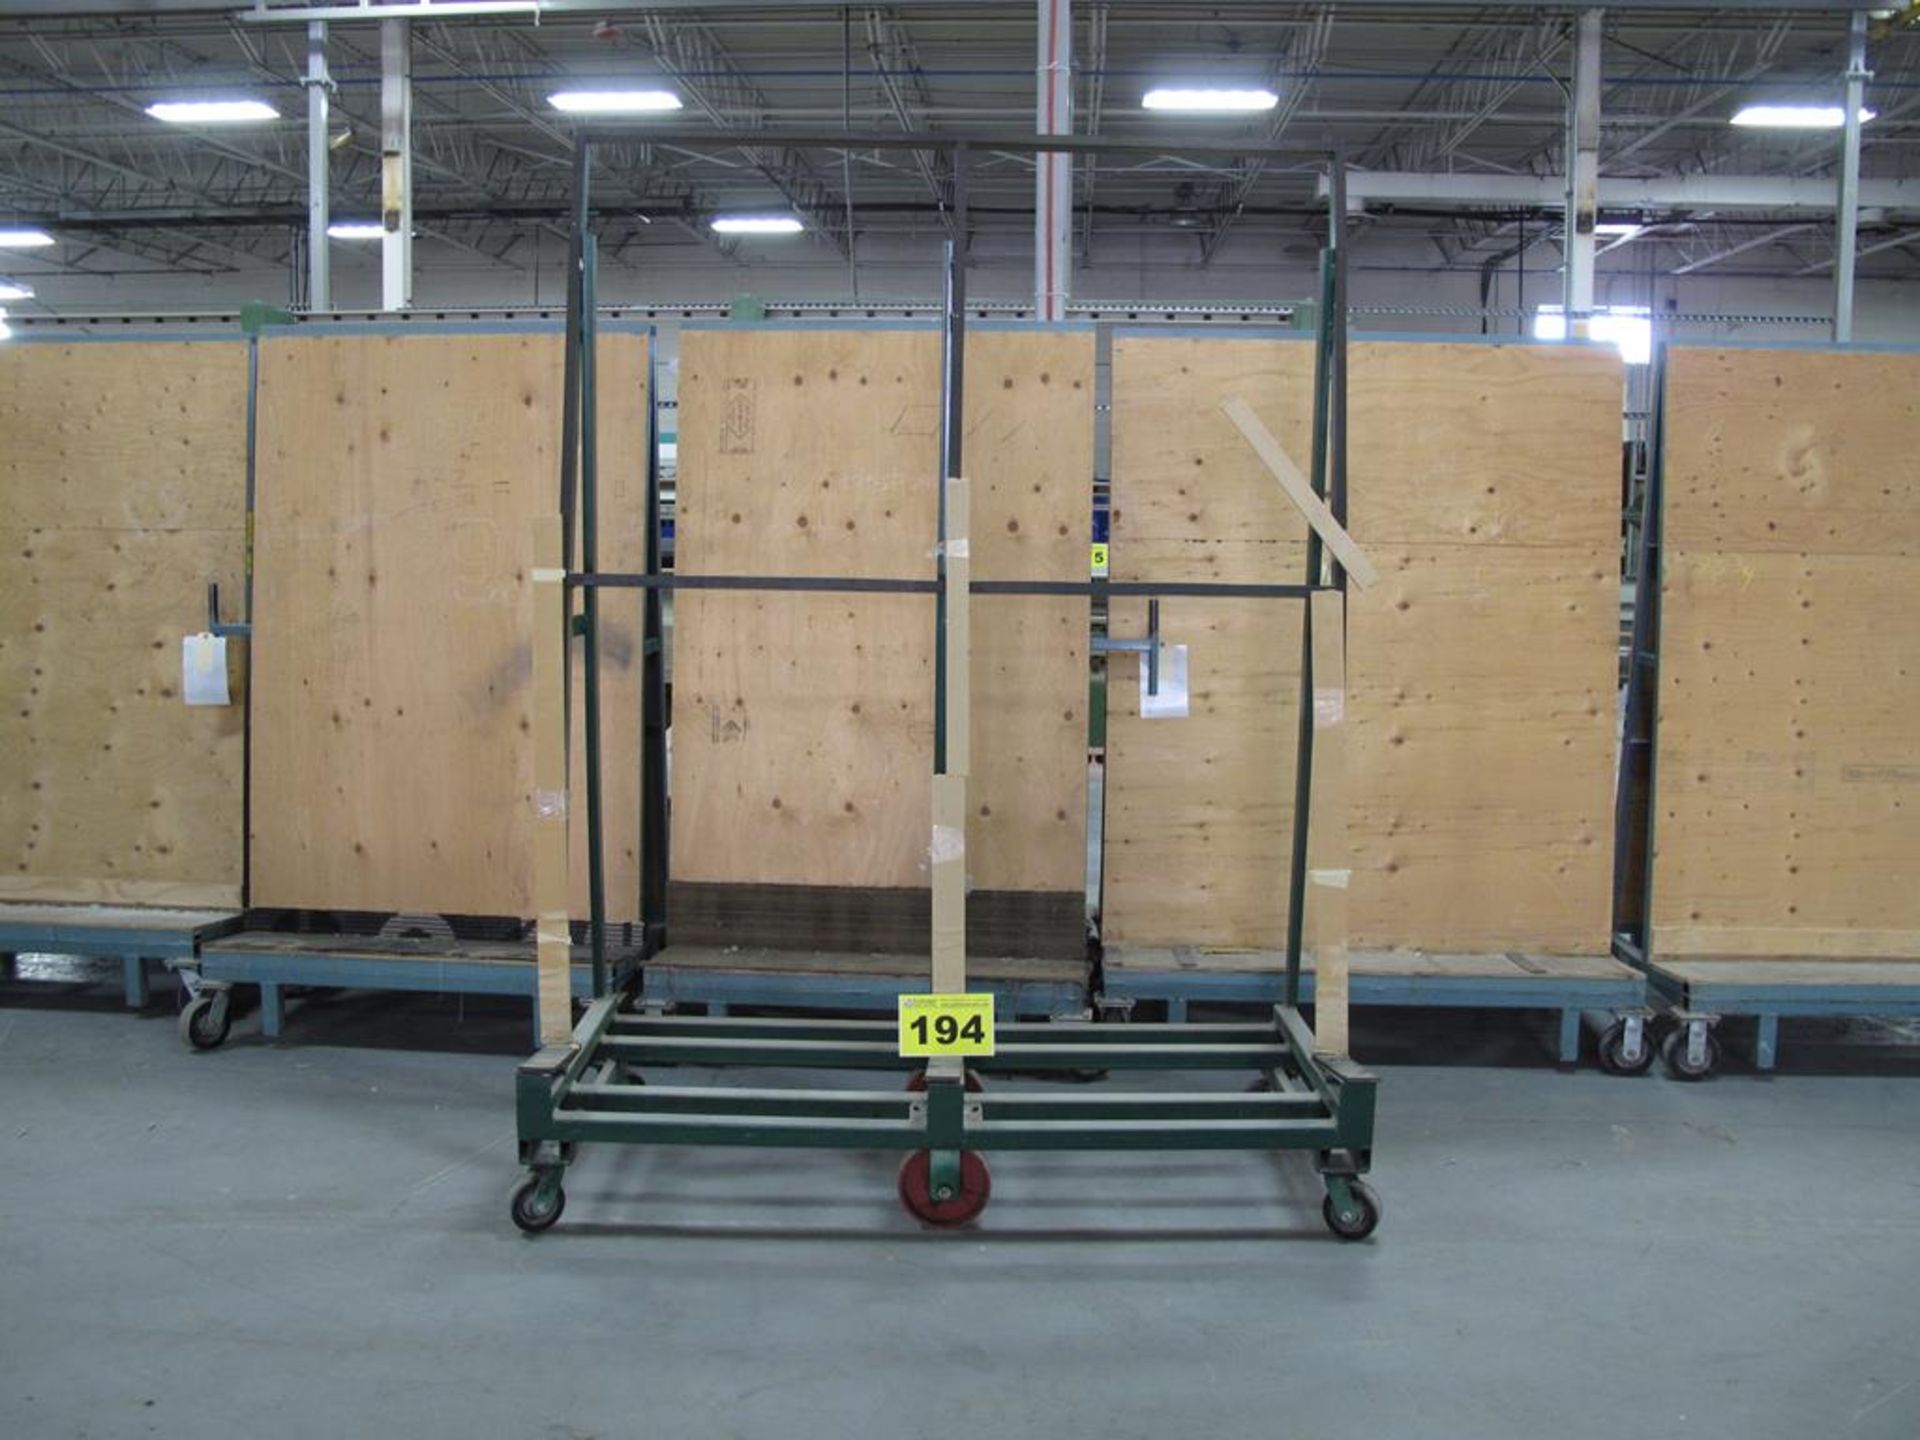 KEAR MFG, 3' X 6 'X 7', 3,000 LBS, SINGLE SIDED, ROLLING GLASS PRODUCTION CART WITH 6 CASTERS